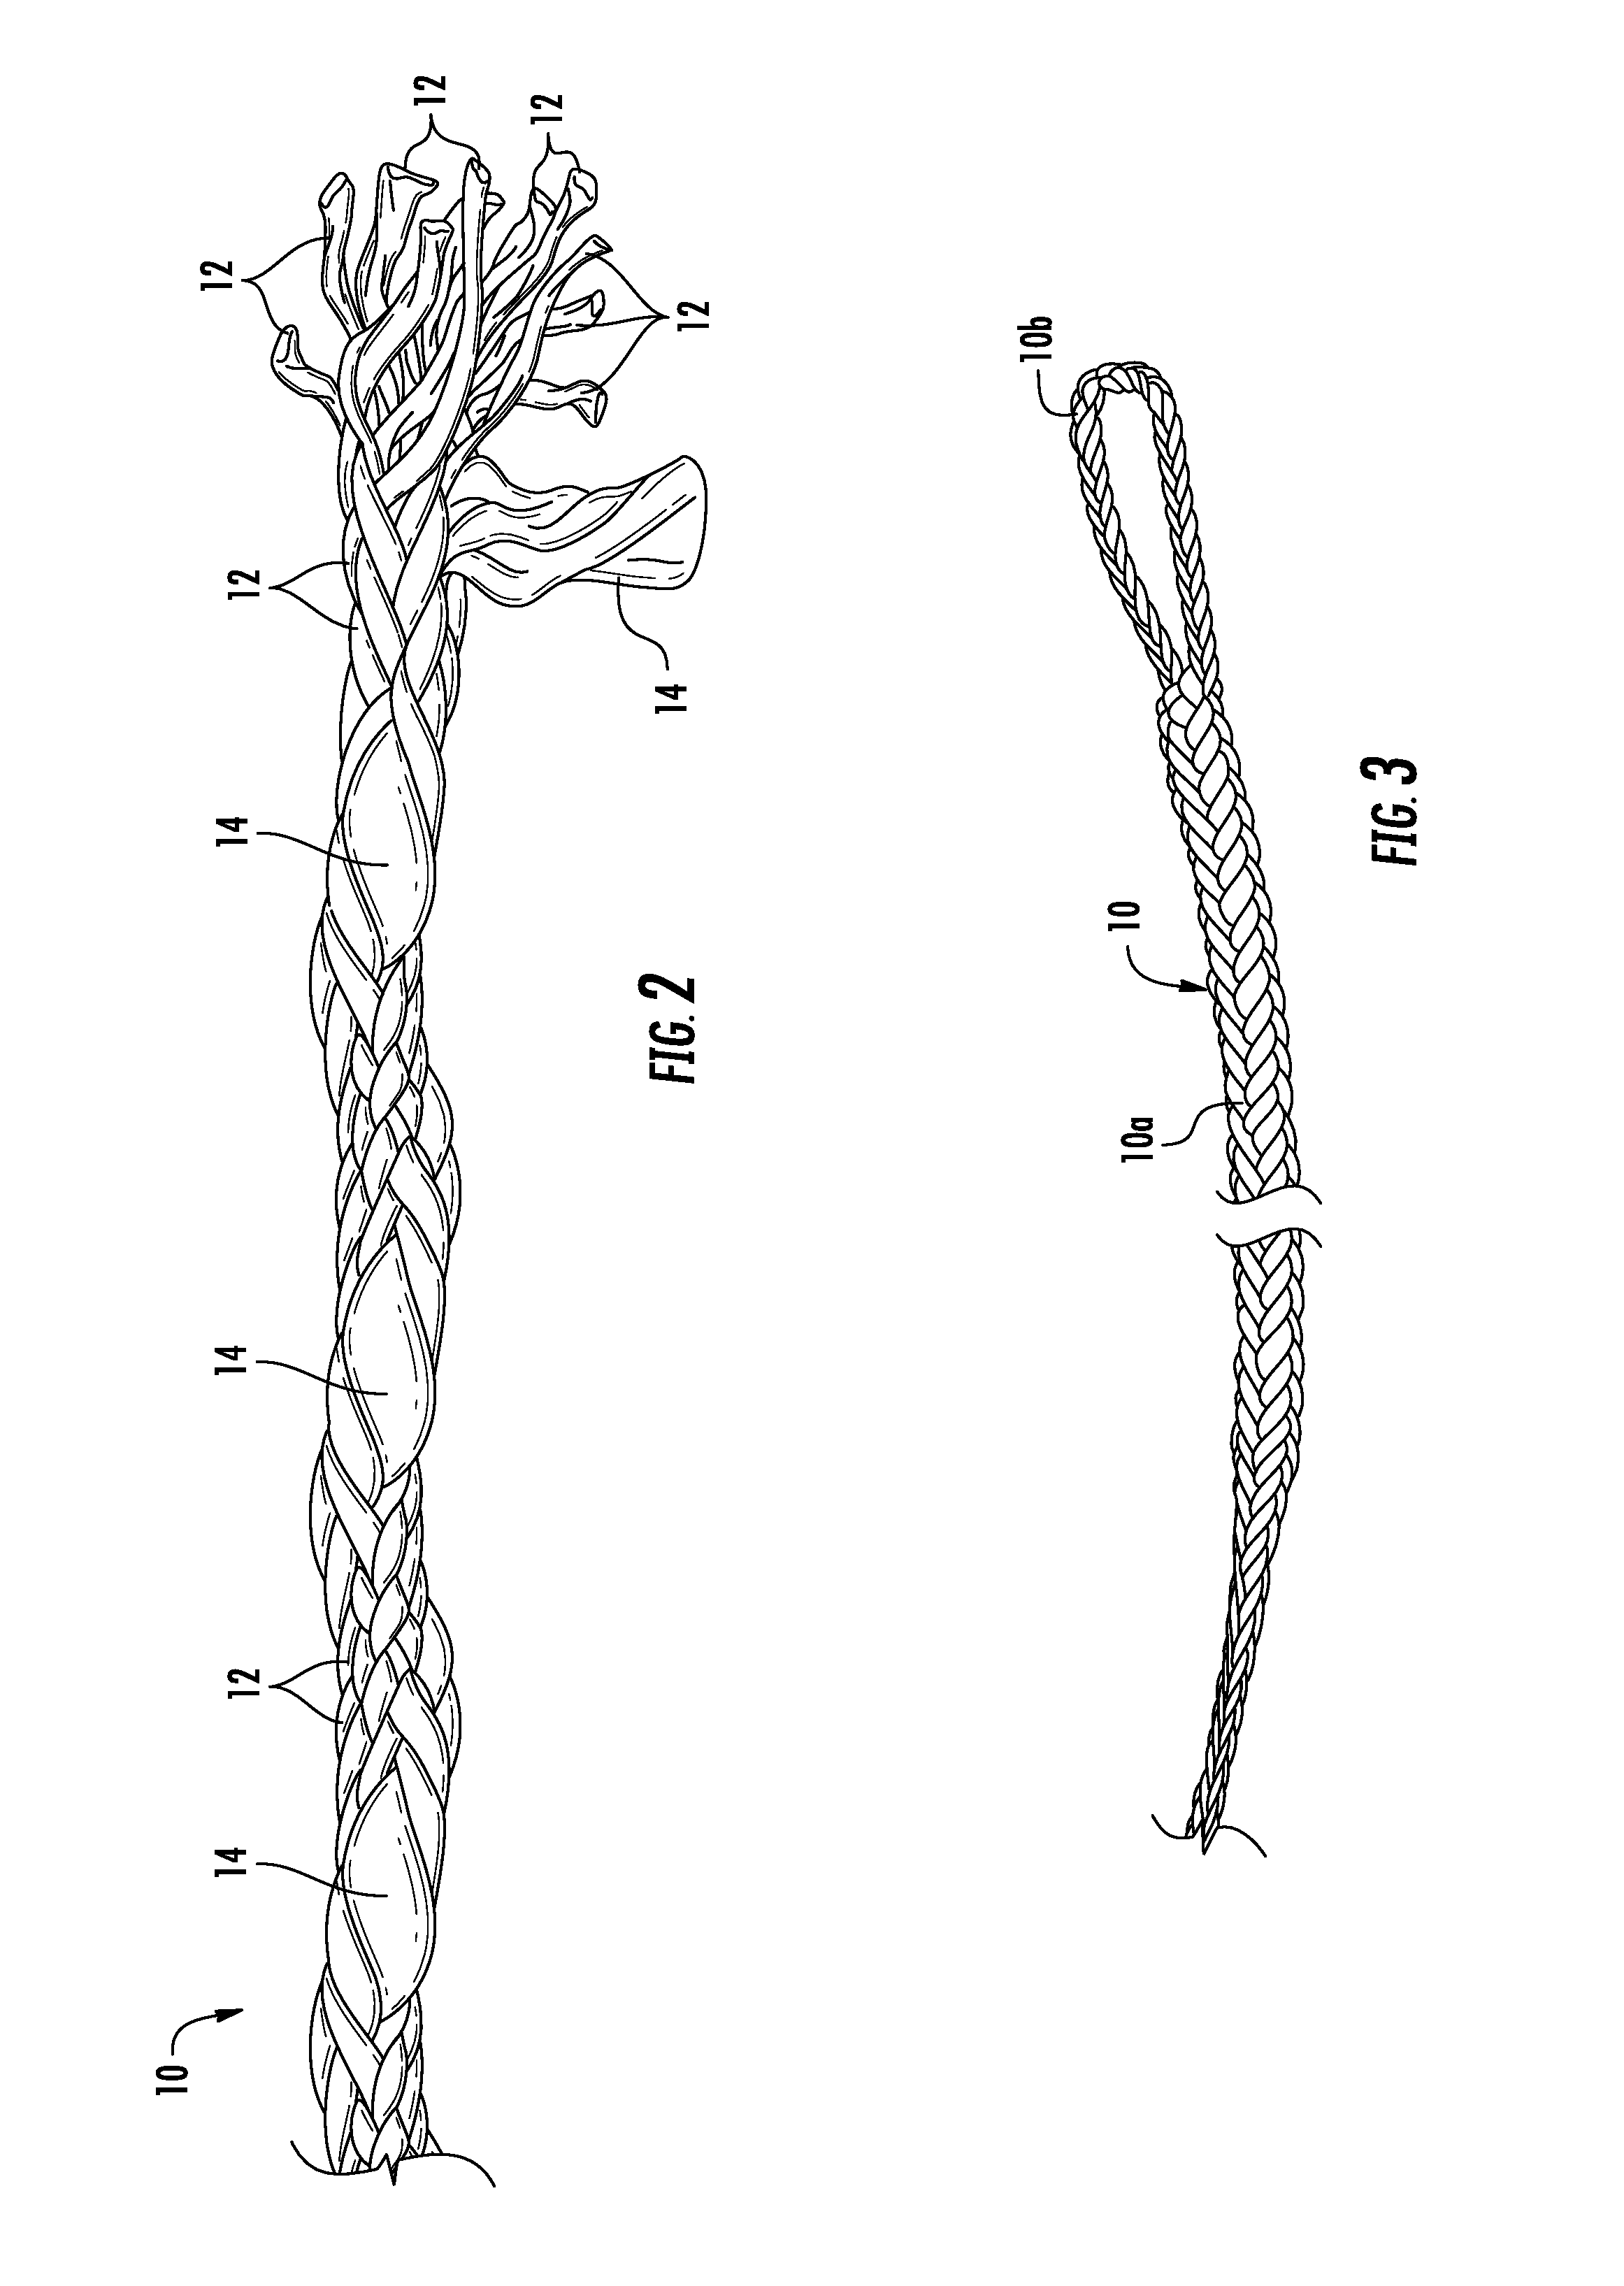 Cord material and methods of using same